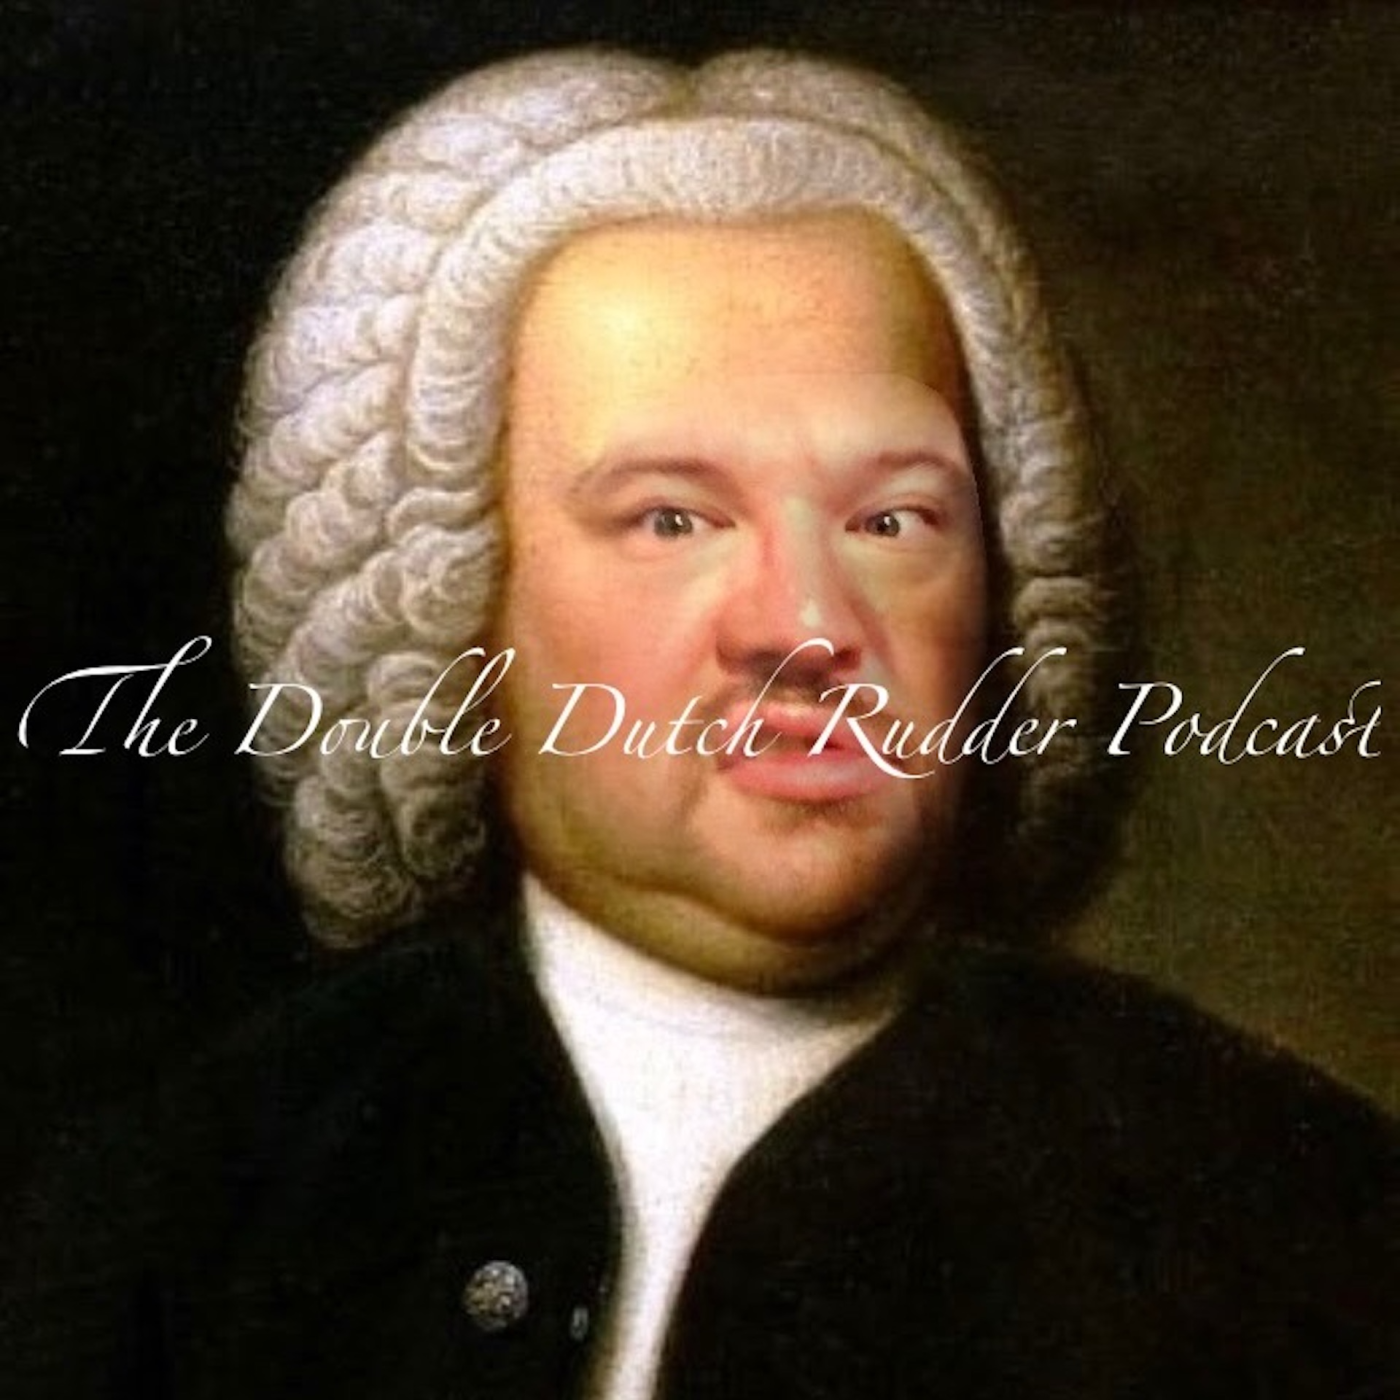 Artwork for the podcast The Double Dutch Rudder Podcast